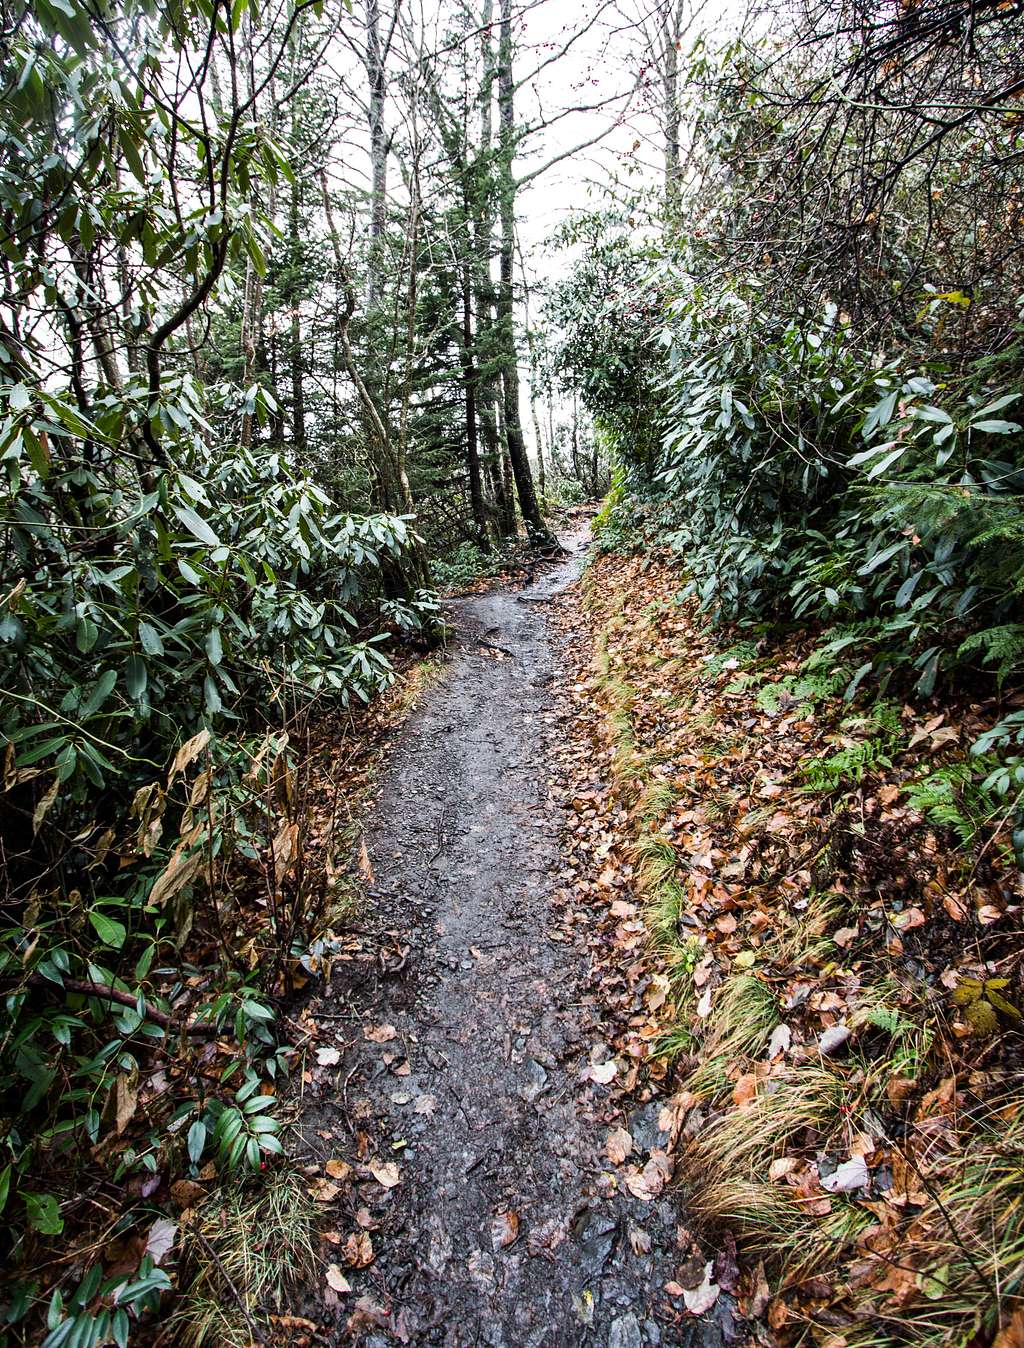 Typical Alum Cave Trail - Rhodo and Mud